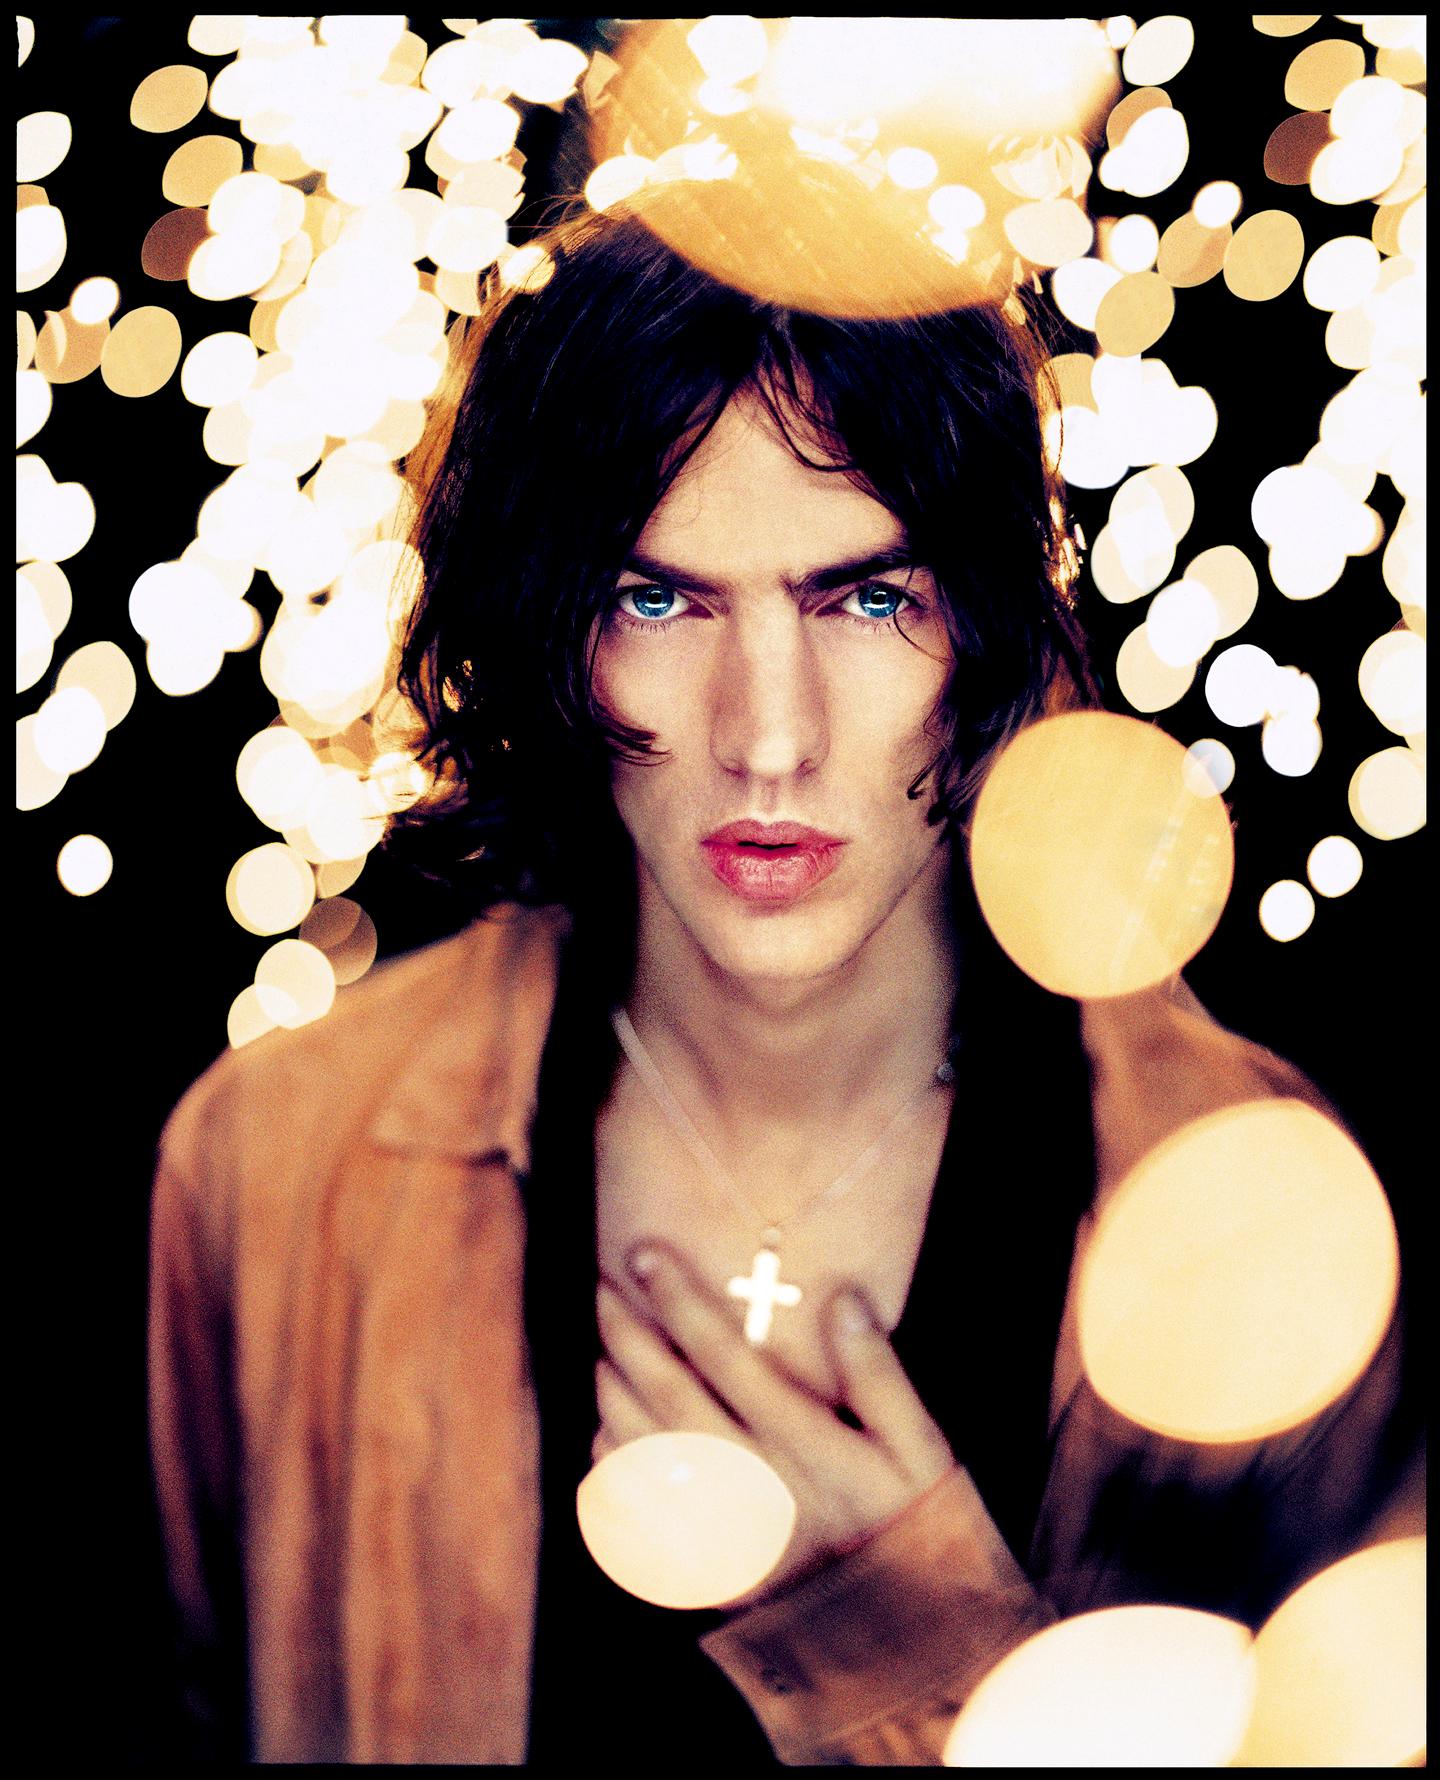 Richard Ashcroft

1999

by Kevin Westenberg
Signed Limited Edition

Kevin Westenberg is famed for his creation of provocative and electrifying images of world-class musicians, artists and movie stars for over 25 years.

His technique of lighting,